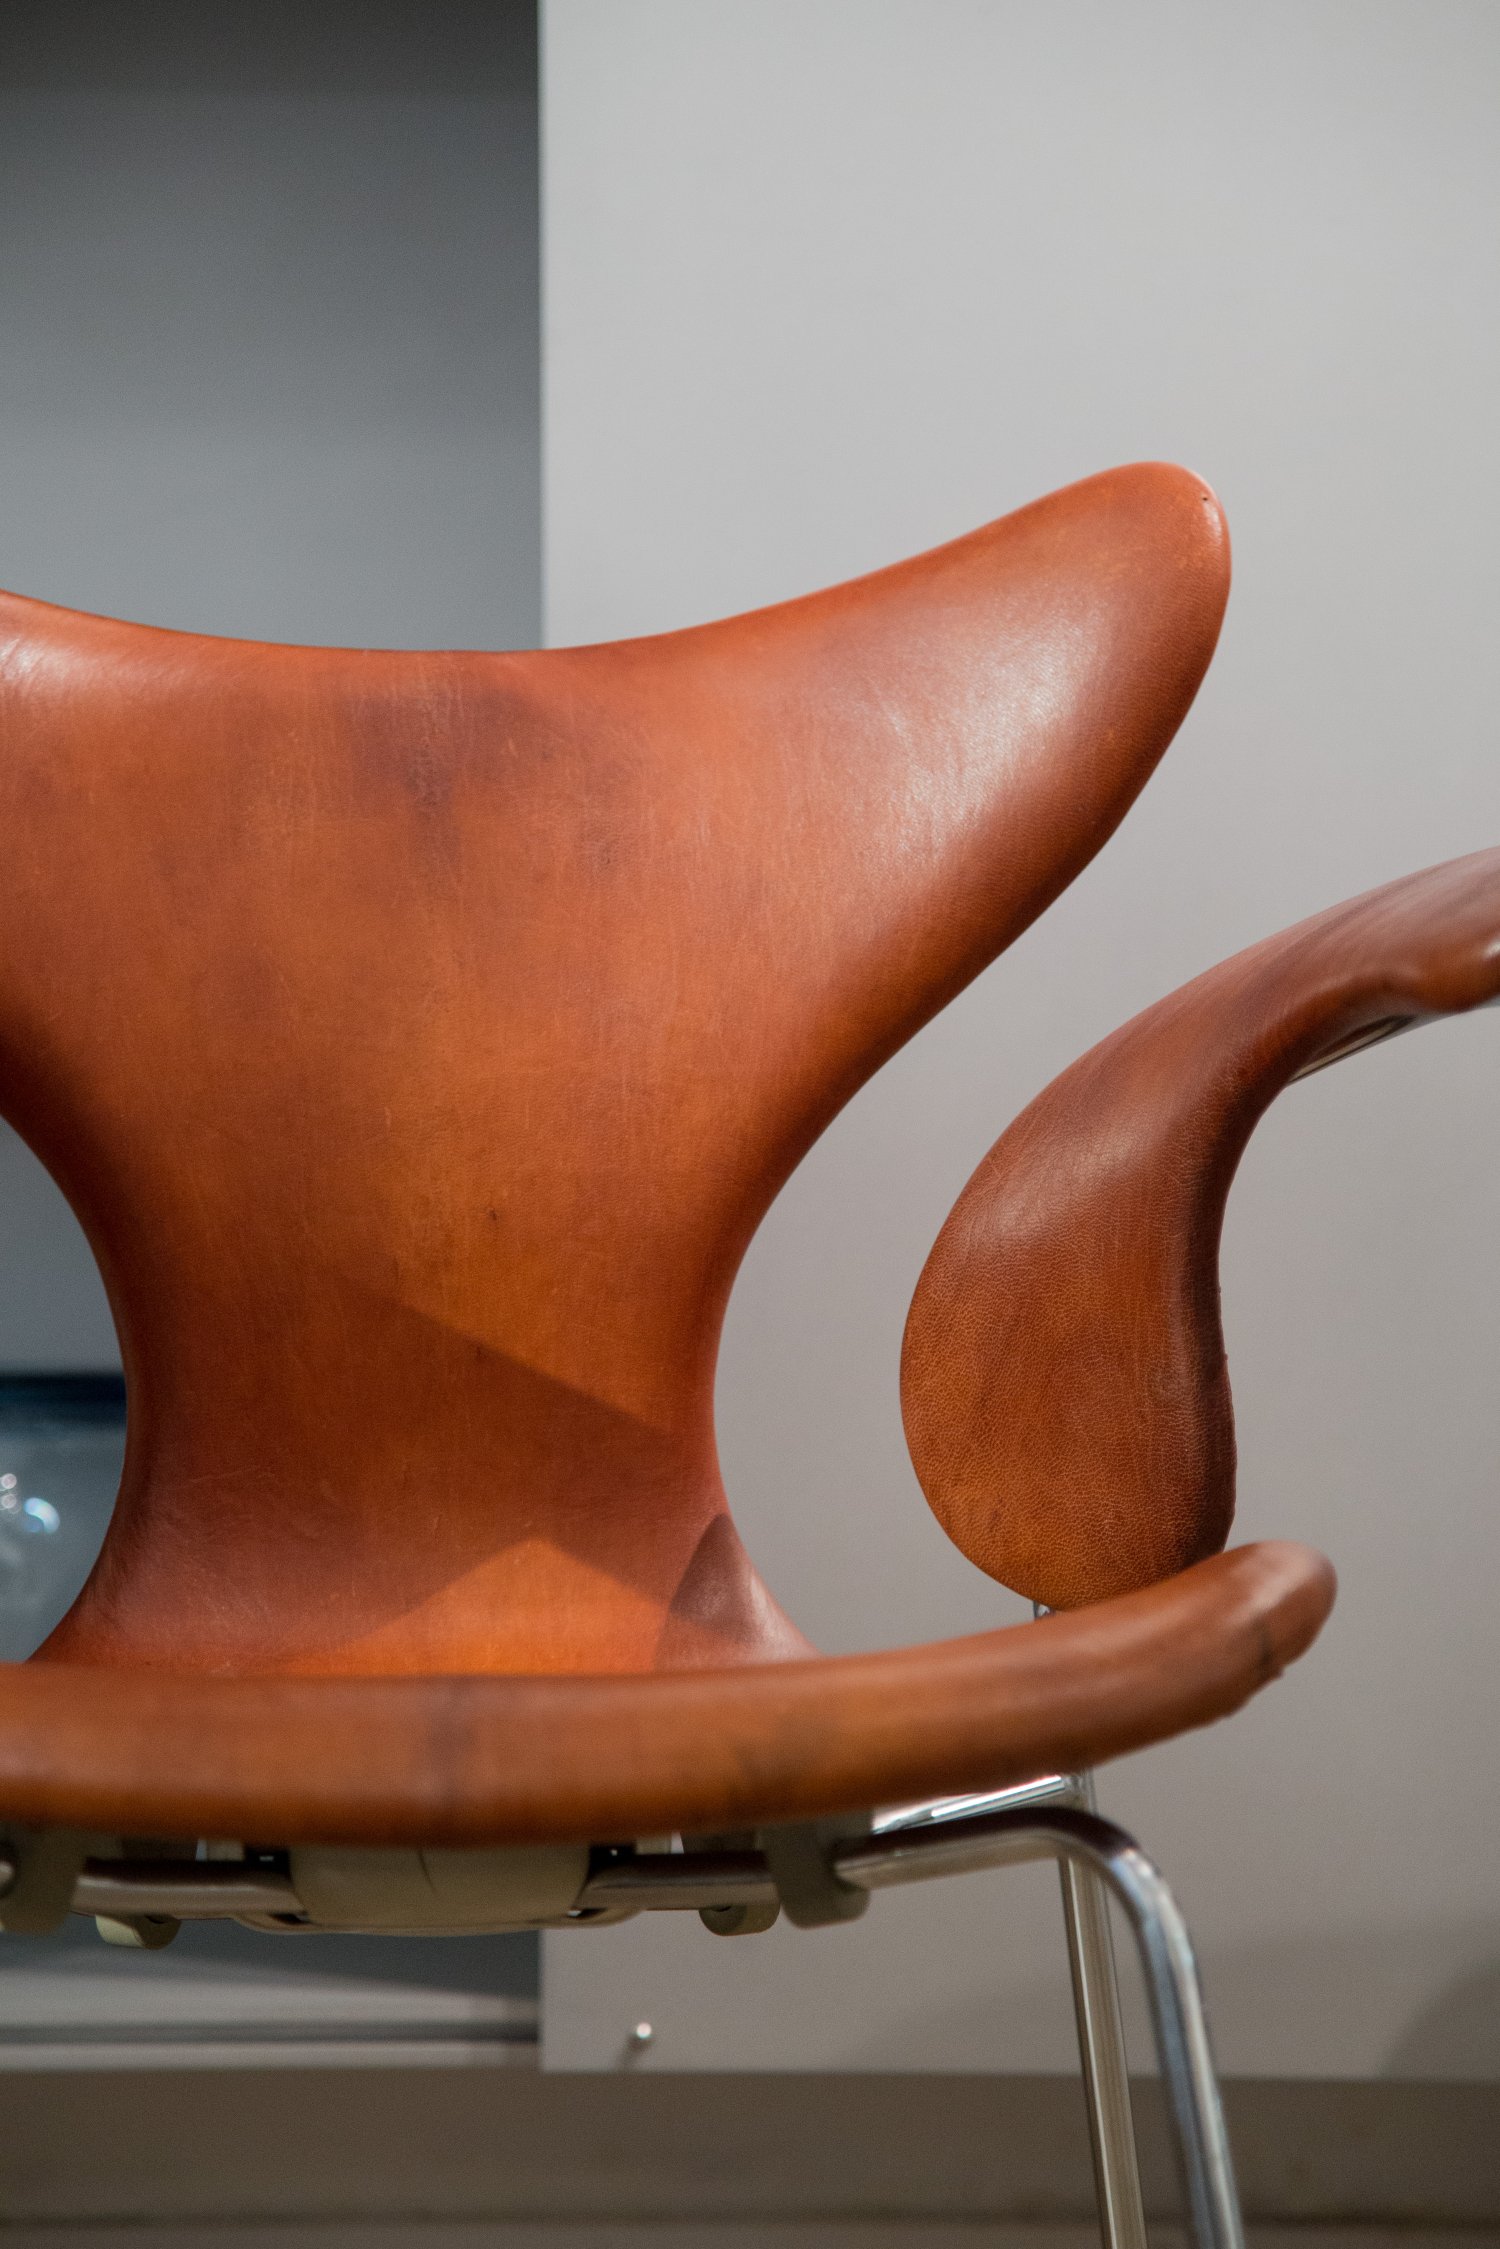 Pair of leather seagull chairs by Arne Jacobsen 